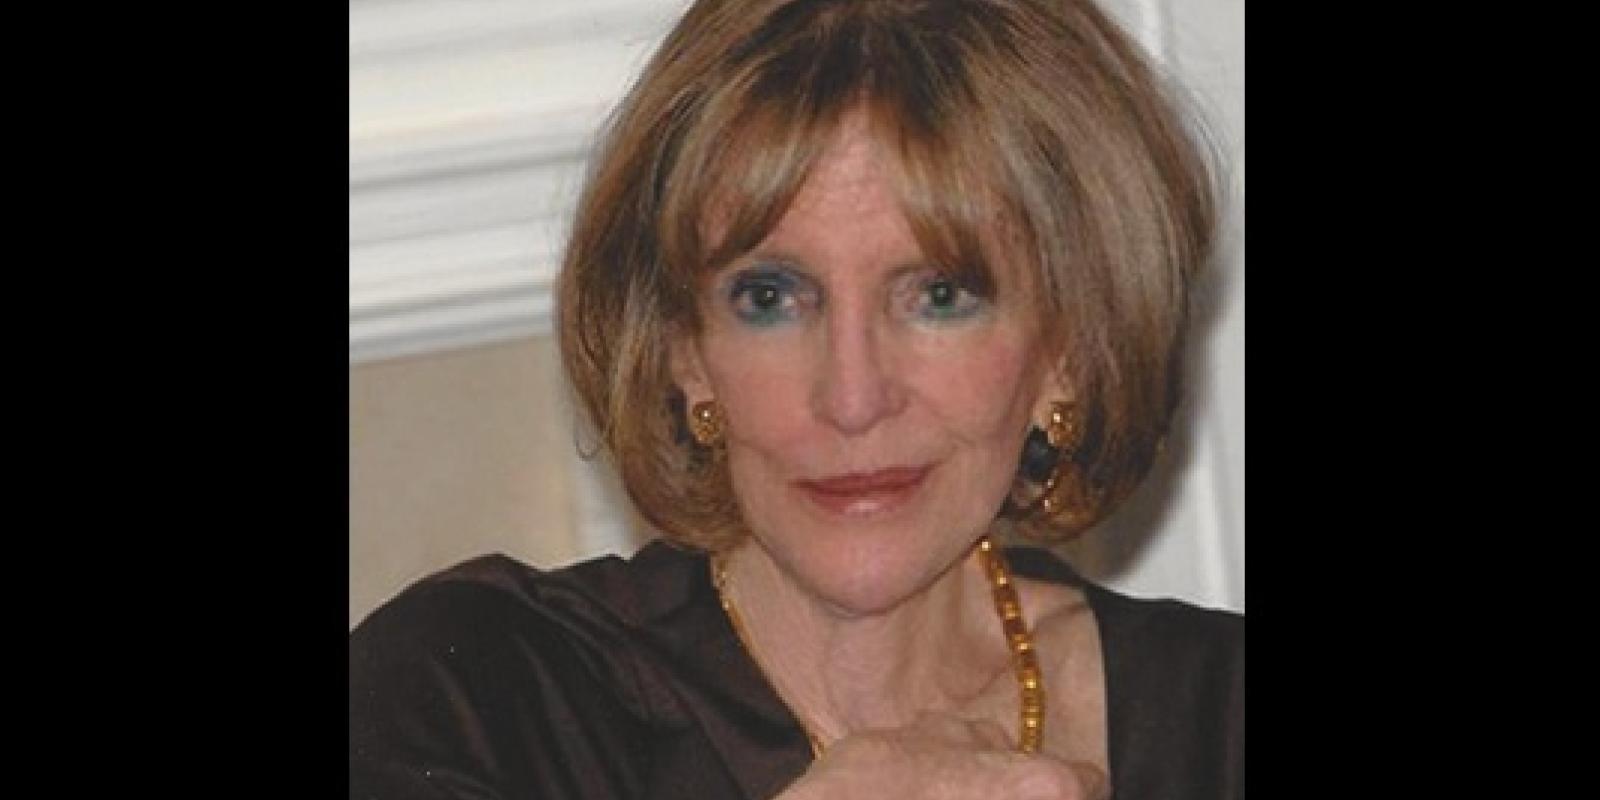 Mary Cross, an AUC trustee and renowned photographer, passed away earlier this month